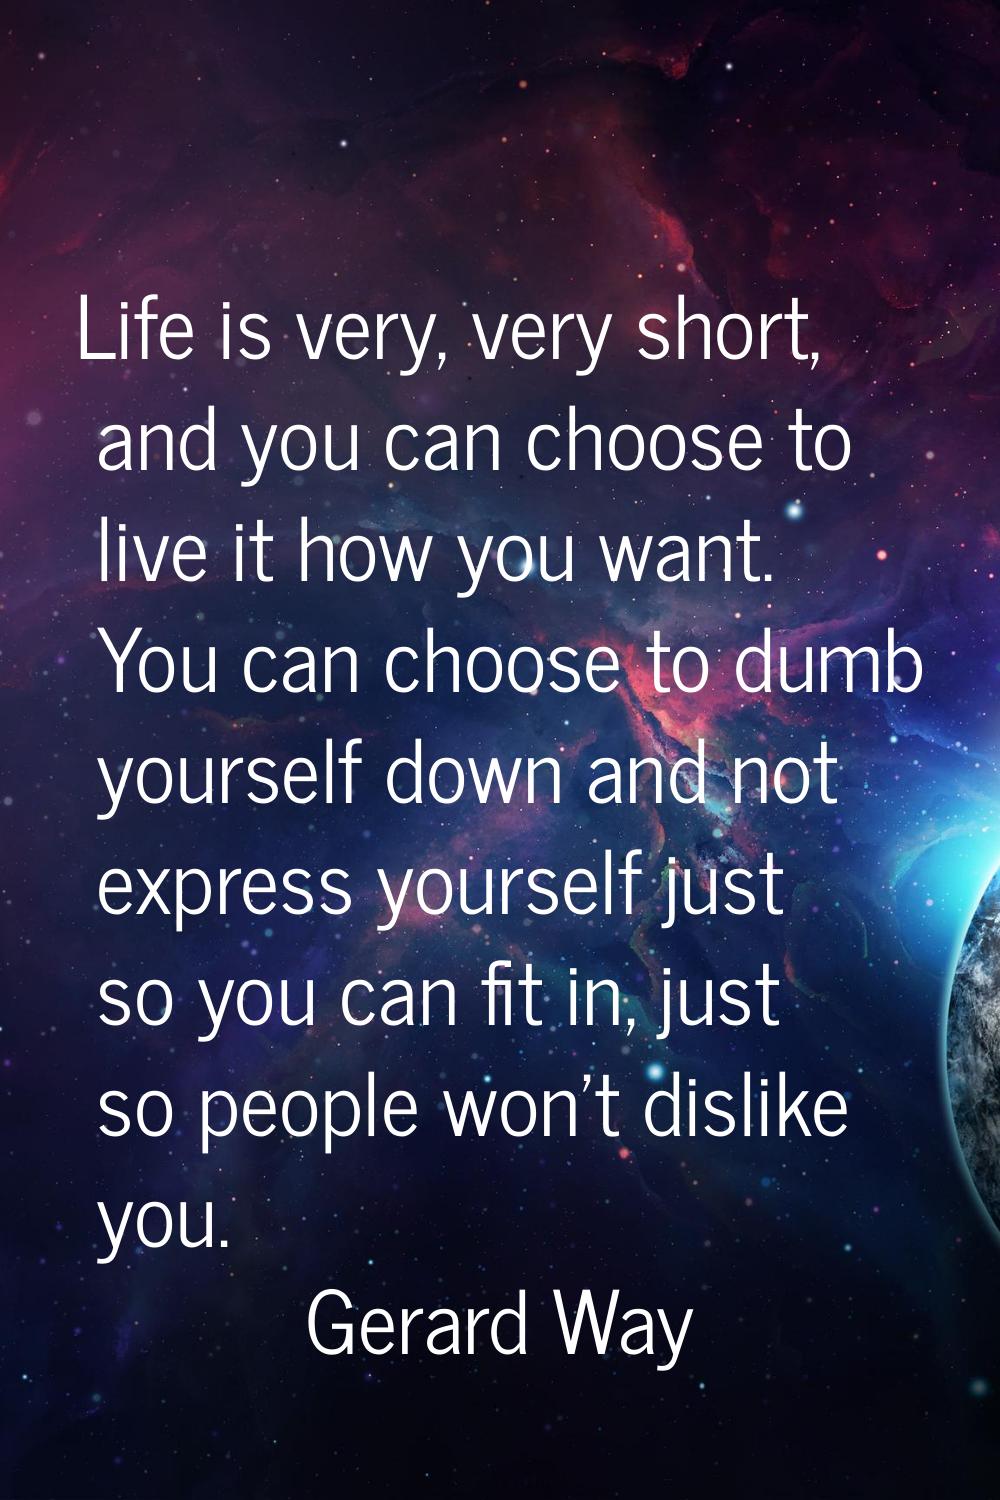 Life is very, very short, and you can choose to live it how you want. You can choose to dumb yourse